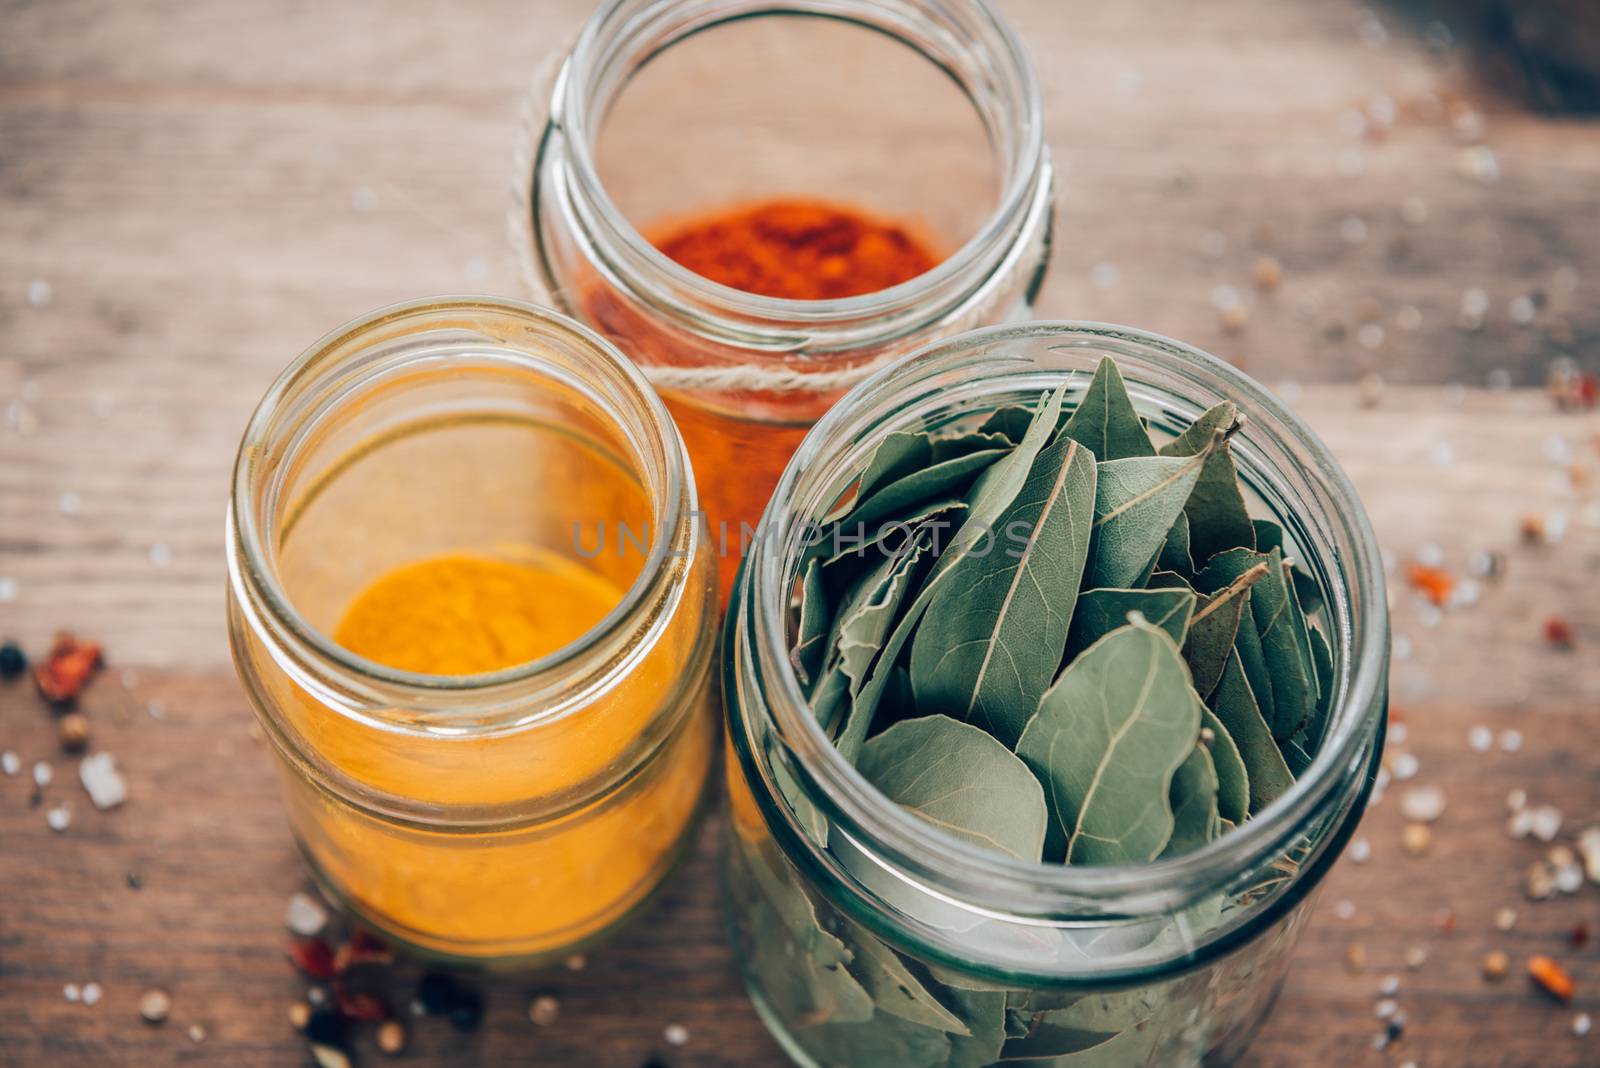 Bay leaves, turmeric and paprika powder in jars on a wooden table.